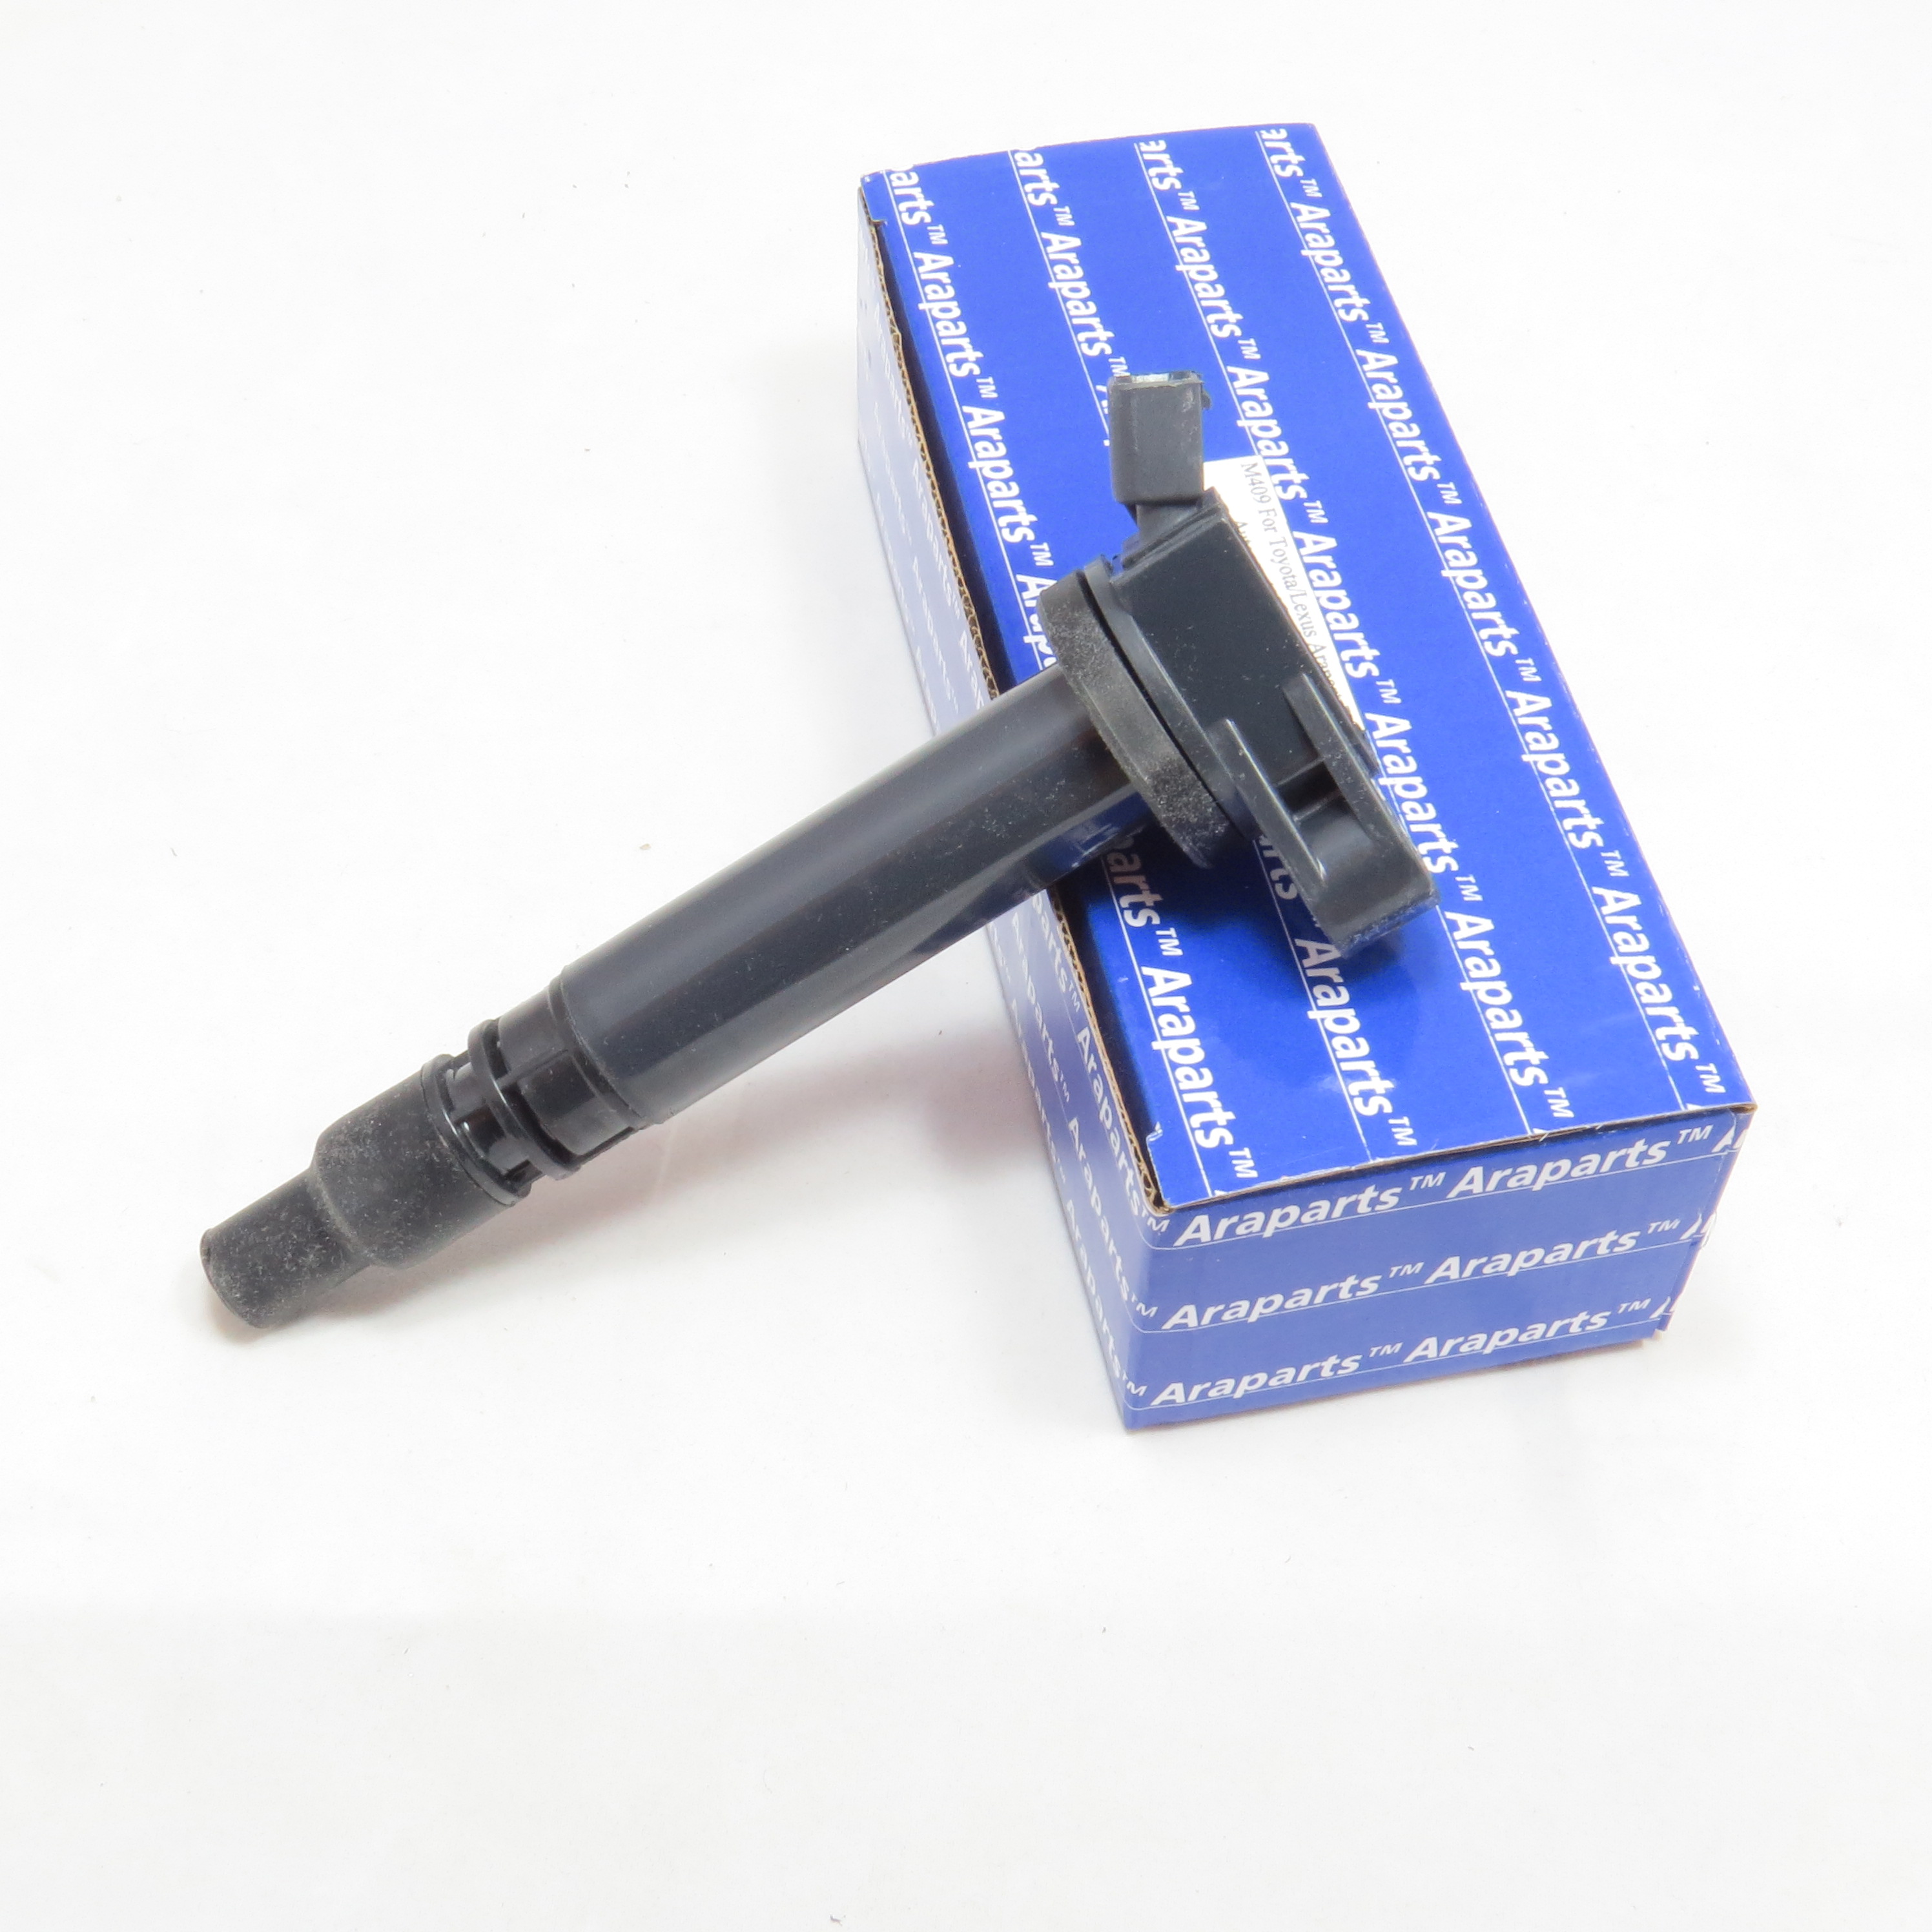 Ignition Coil for a 2008 Toyota Tundra 5.7L V8